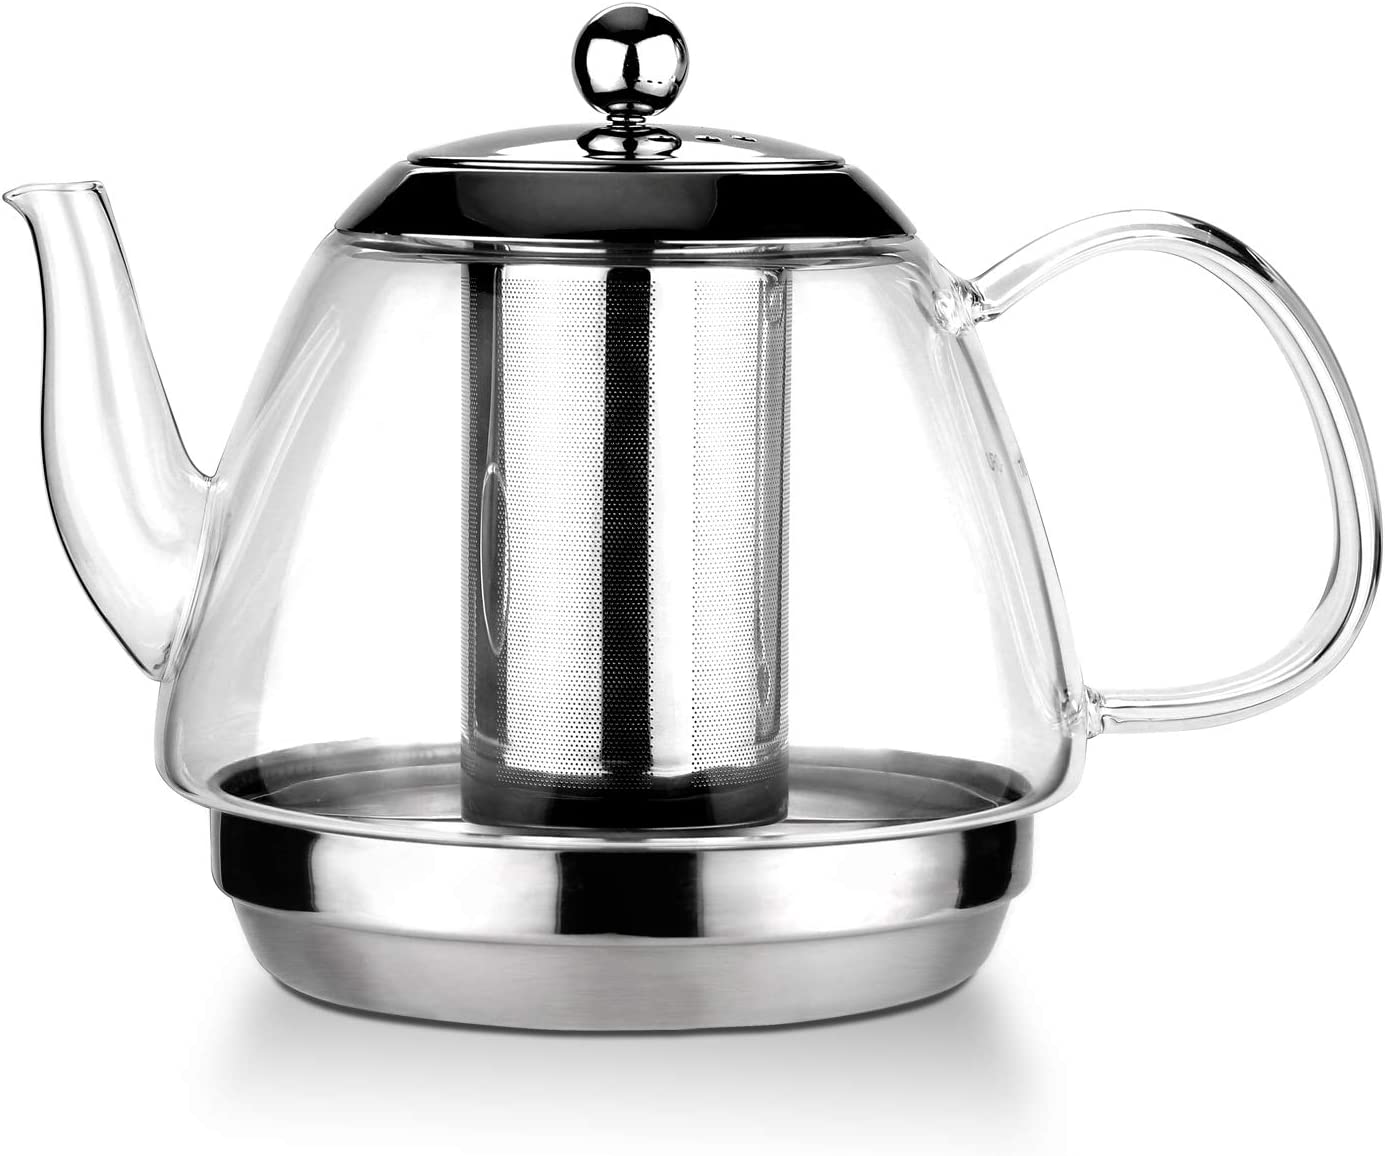 TOYO HOFU Large Glass Teapot with Removable Stainless Steel Infuser Teapot for Loose Tea, Heat Resistant, Oven Safe, 1600ml